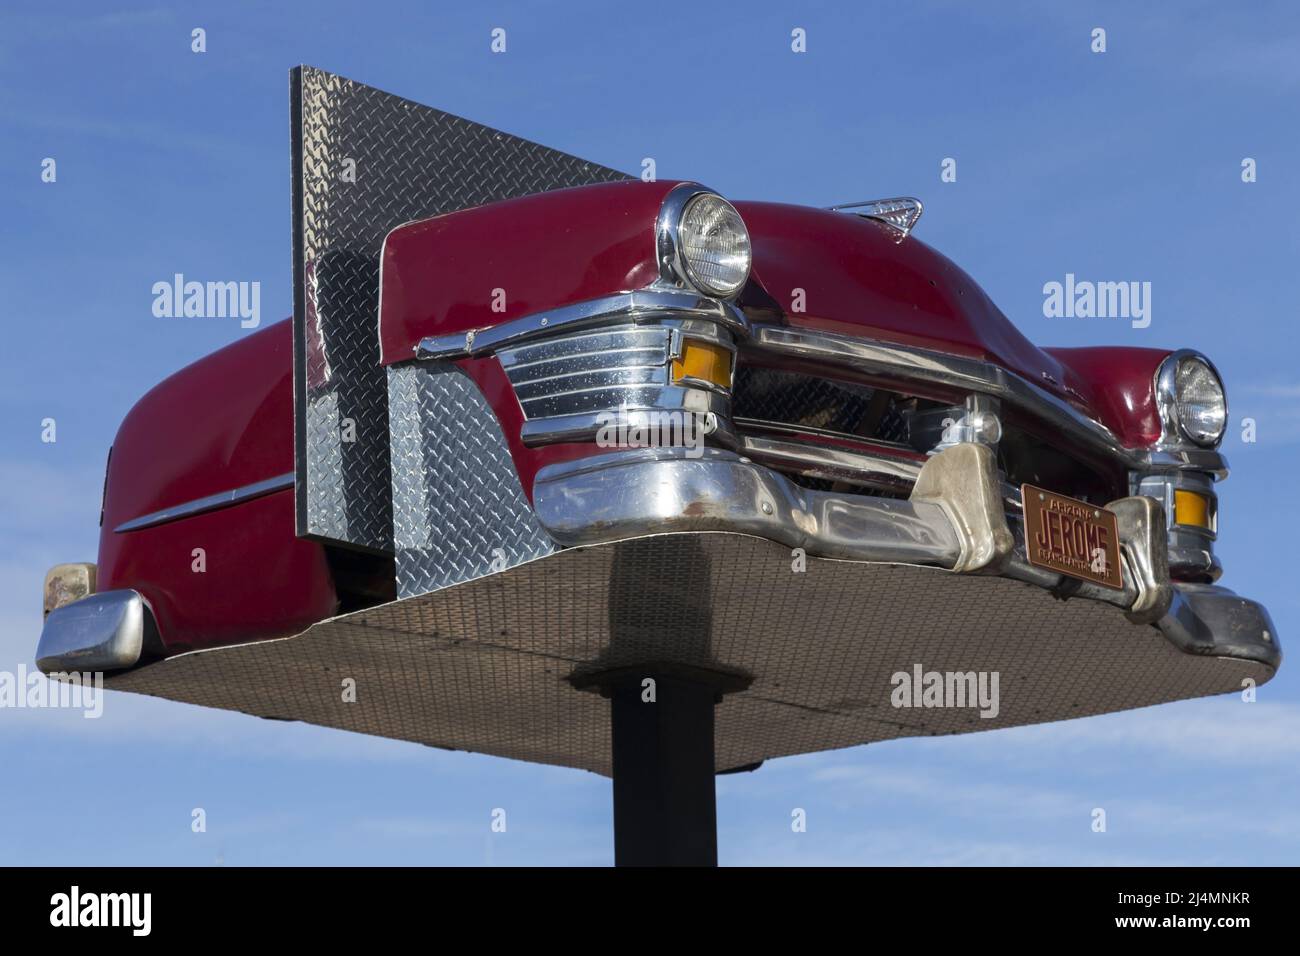 Front Side View of Classic Red Vintage Chevrolet Model Car or Chevy American Vehicle from 1950s on Elevated Platform in City of Jerome, Arizona Stock Photo